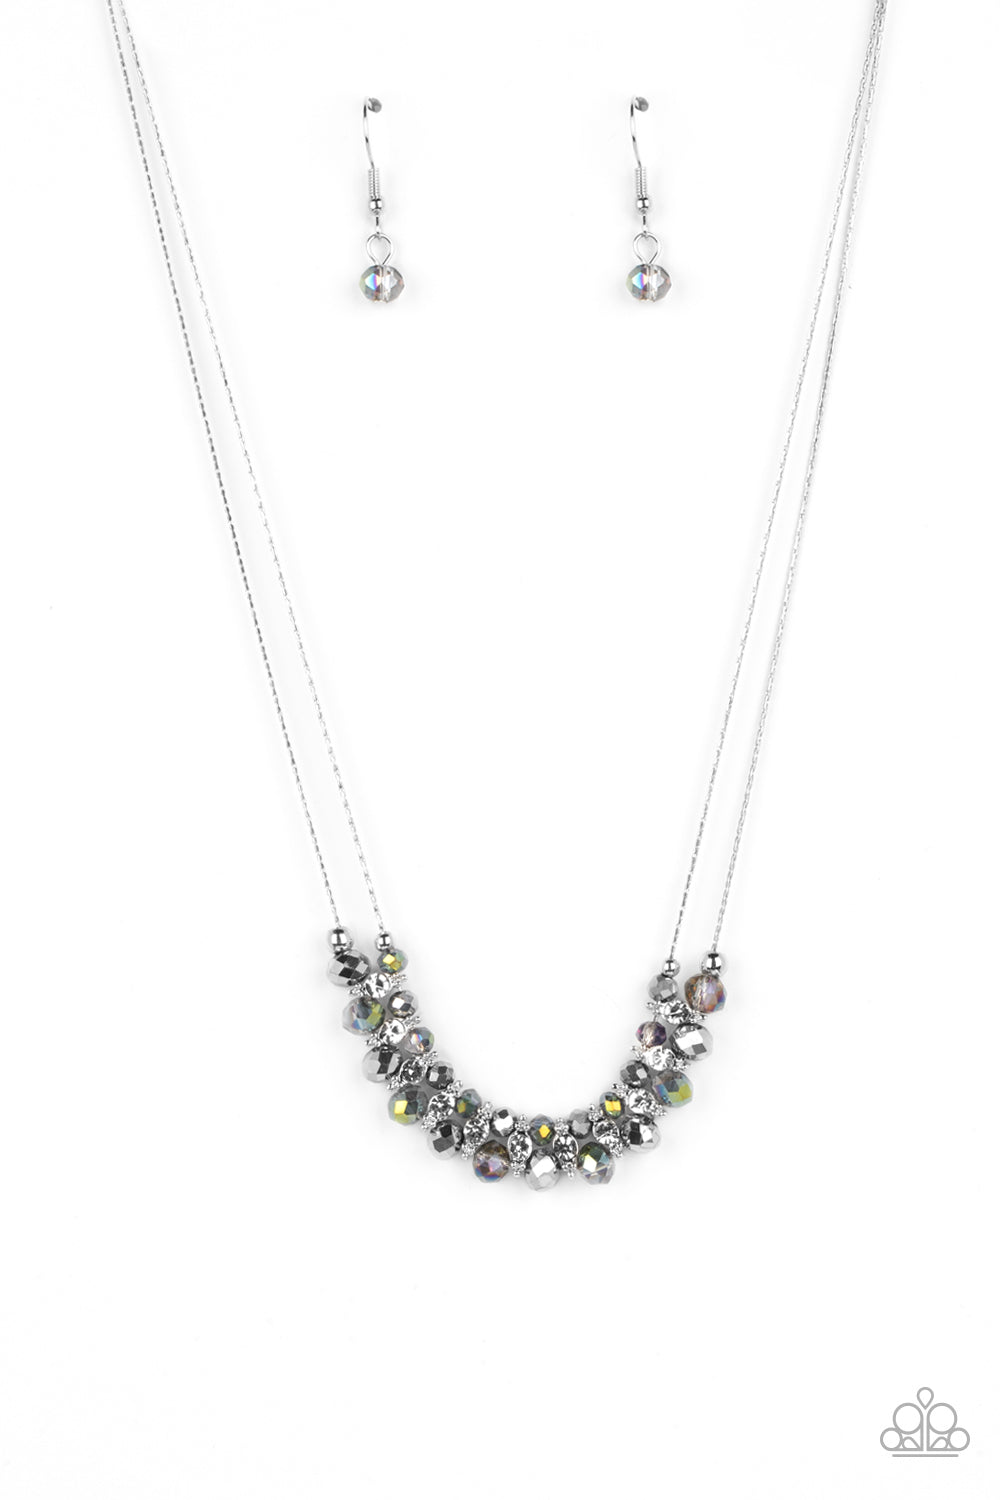 Shimmering High Society - Silver Chain/Glassy Beads/White Rhinestone Paparazzi Necklace & matching earrings